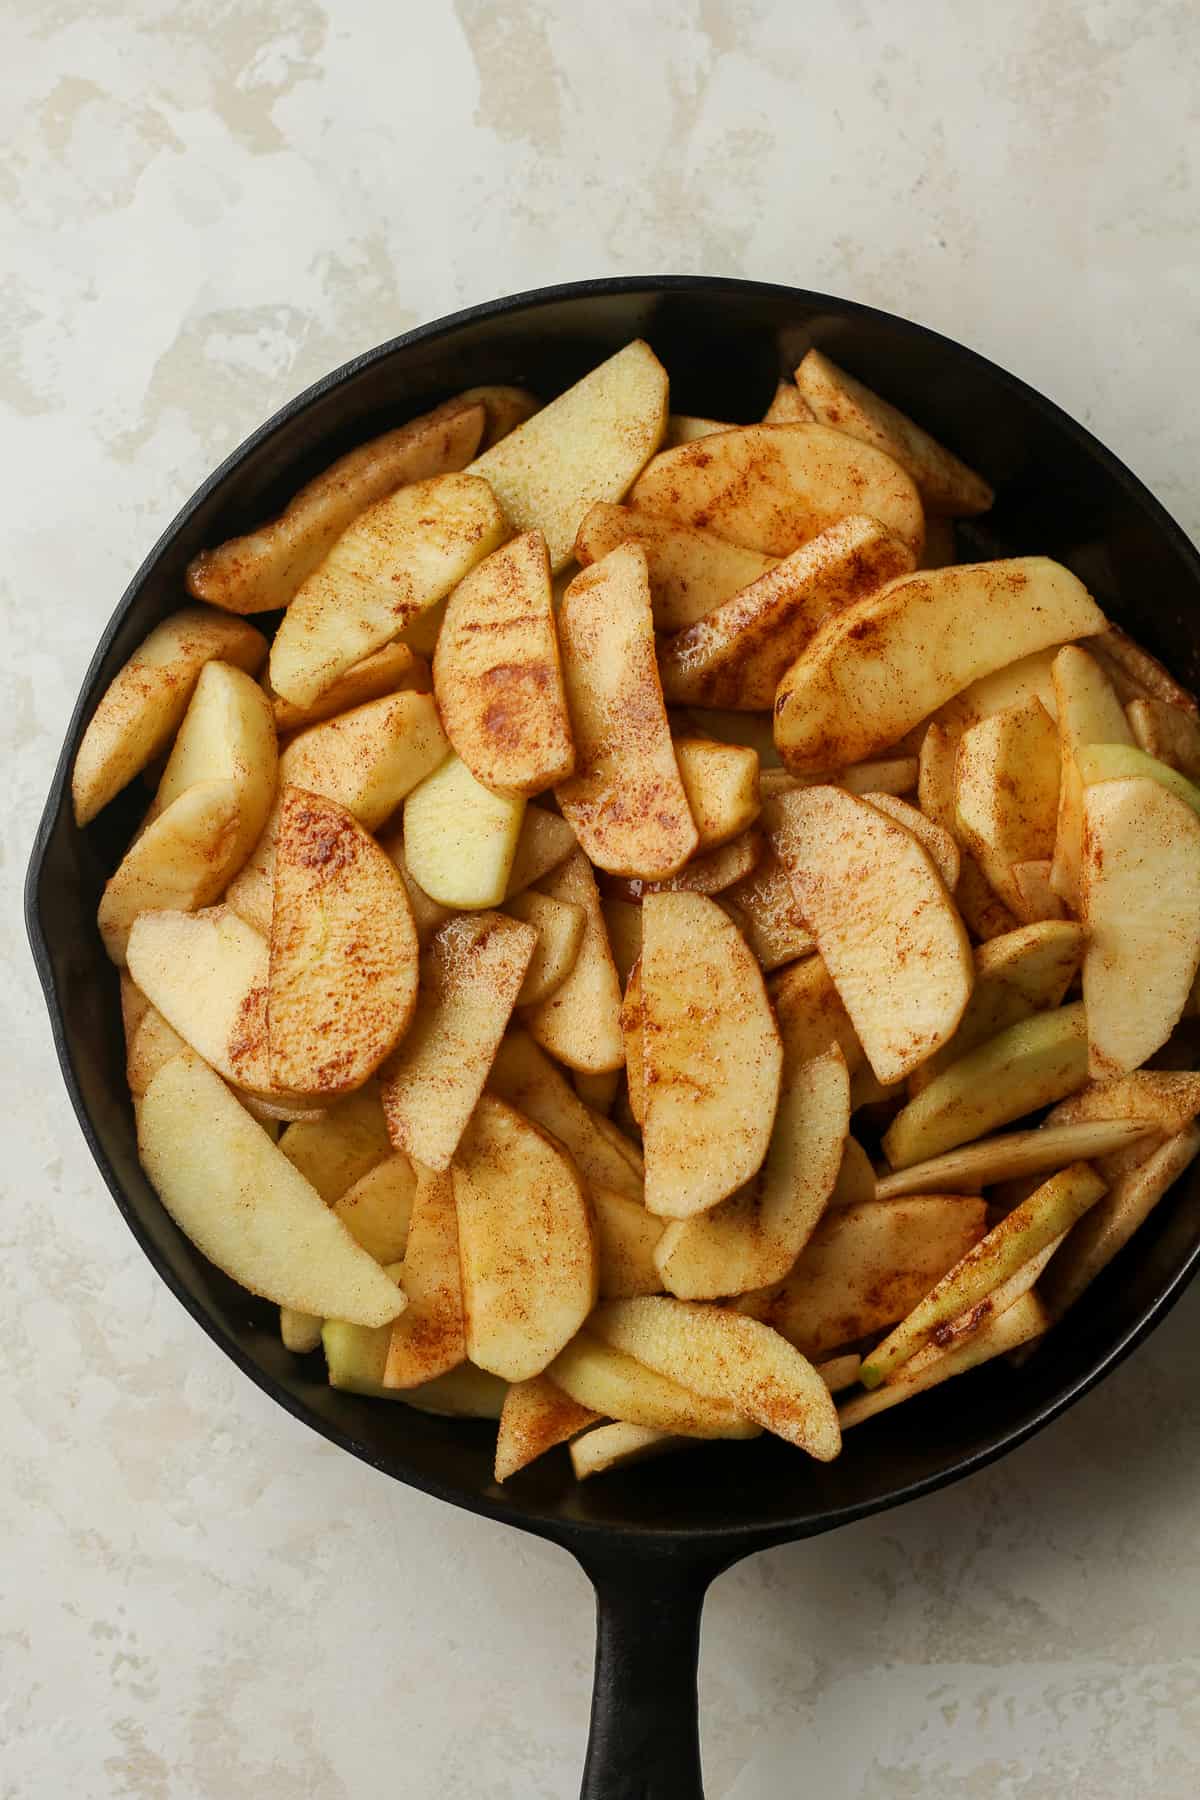 A skillet of the sugared sliced apples.